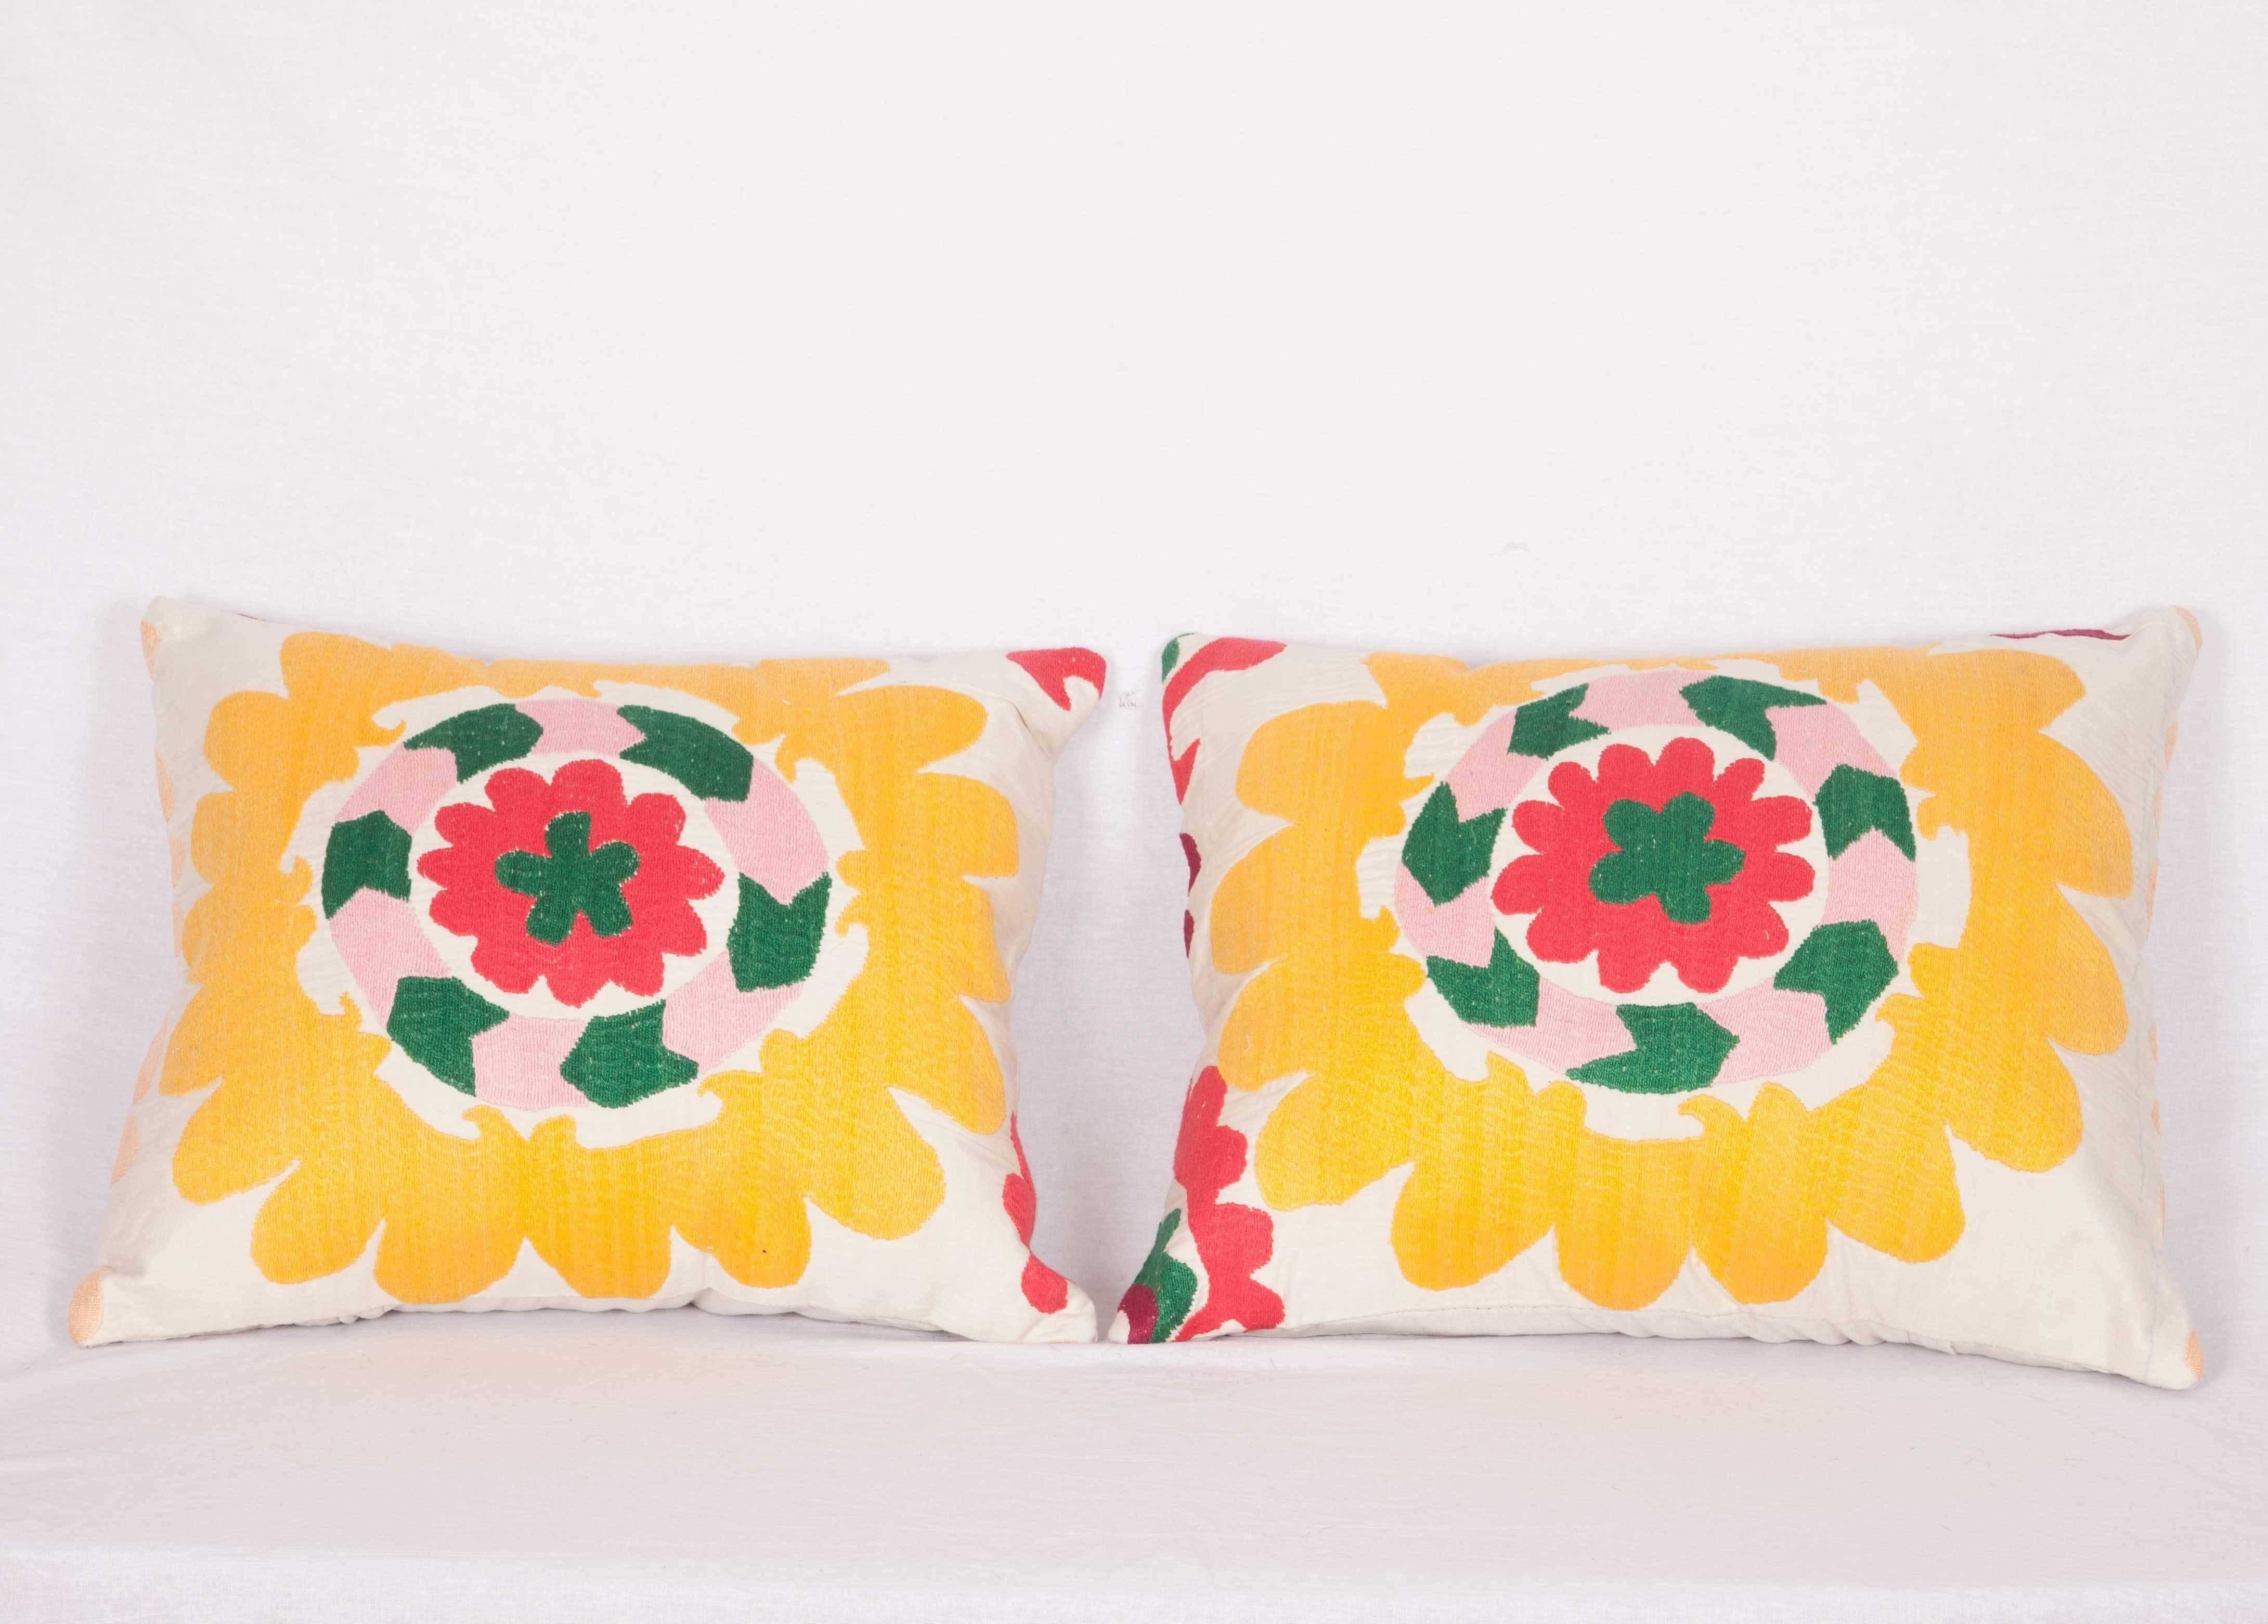 The pillows are made out of vintage Tajik Suzani. They do not come with an insert but they come with a bag made to the size and out of cotton to accommodate the filling. The backing is made of linen. Please note filling is not provided. Since the